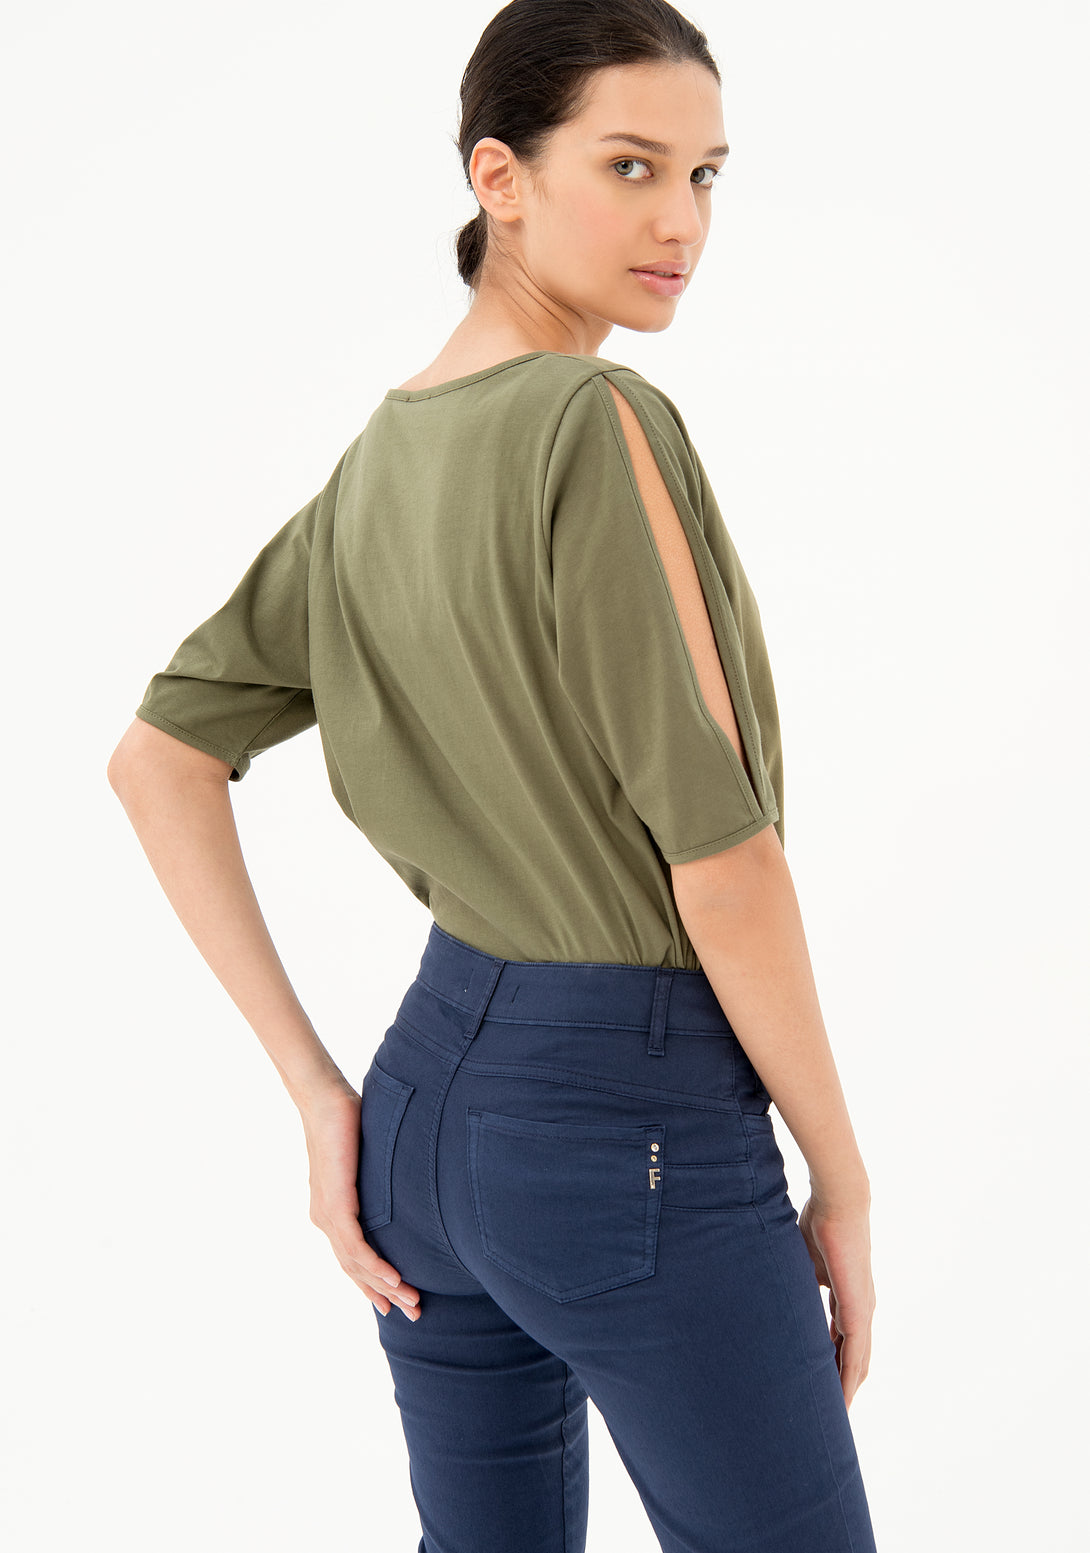 Pant skinny fir push-up effect made in stretch gabardine